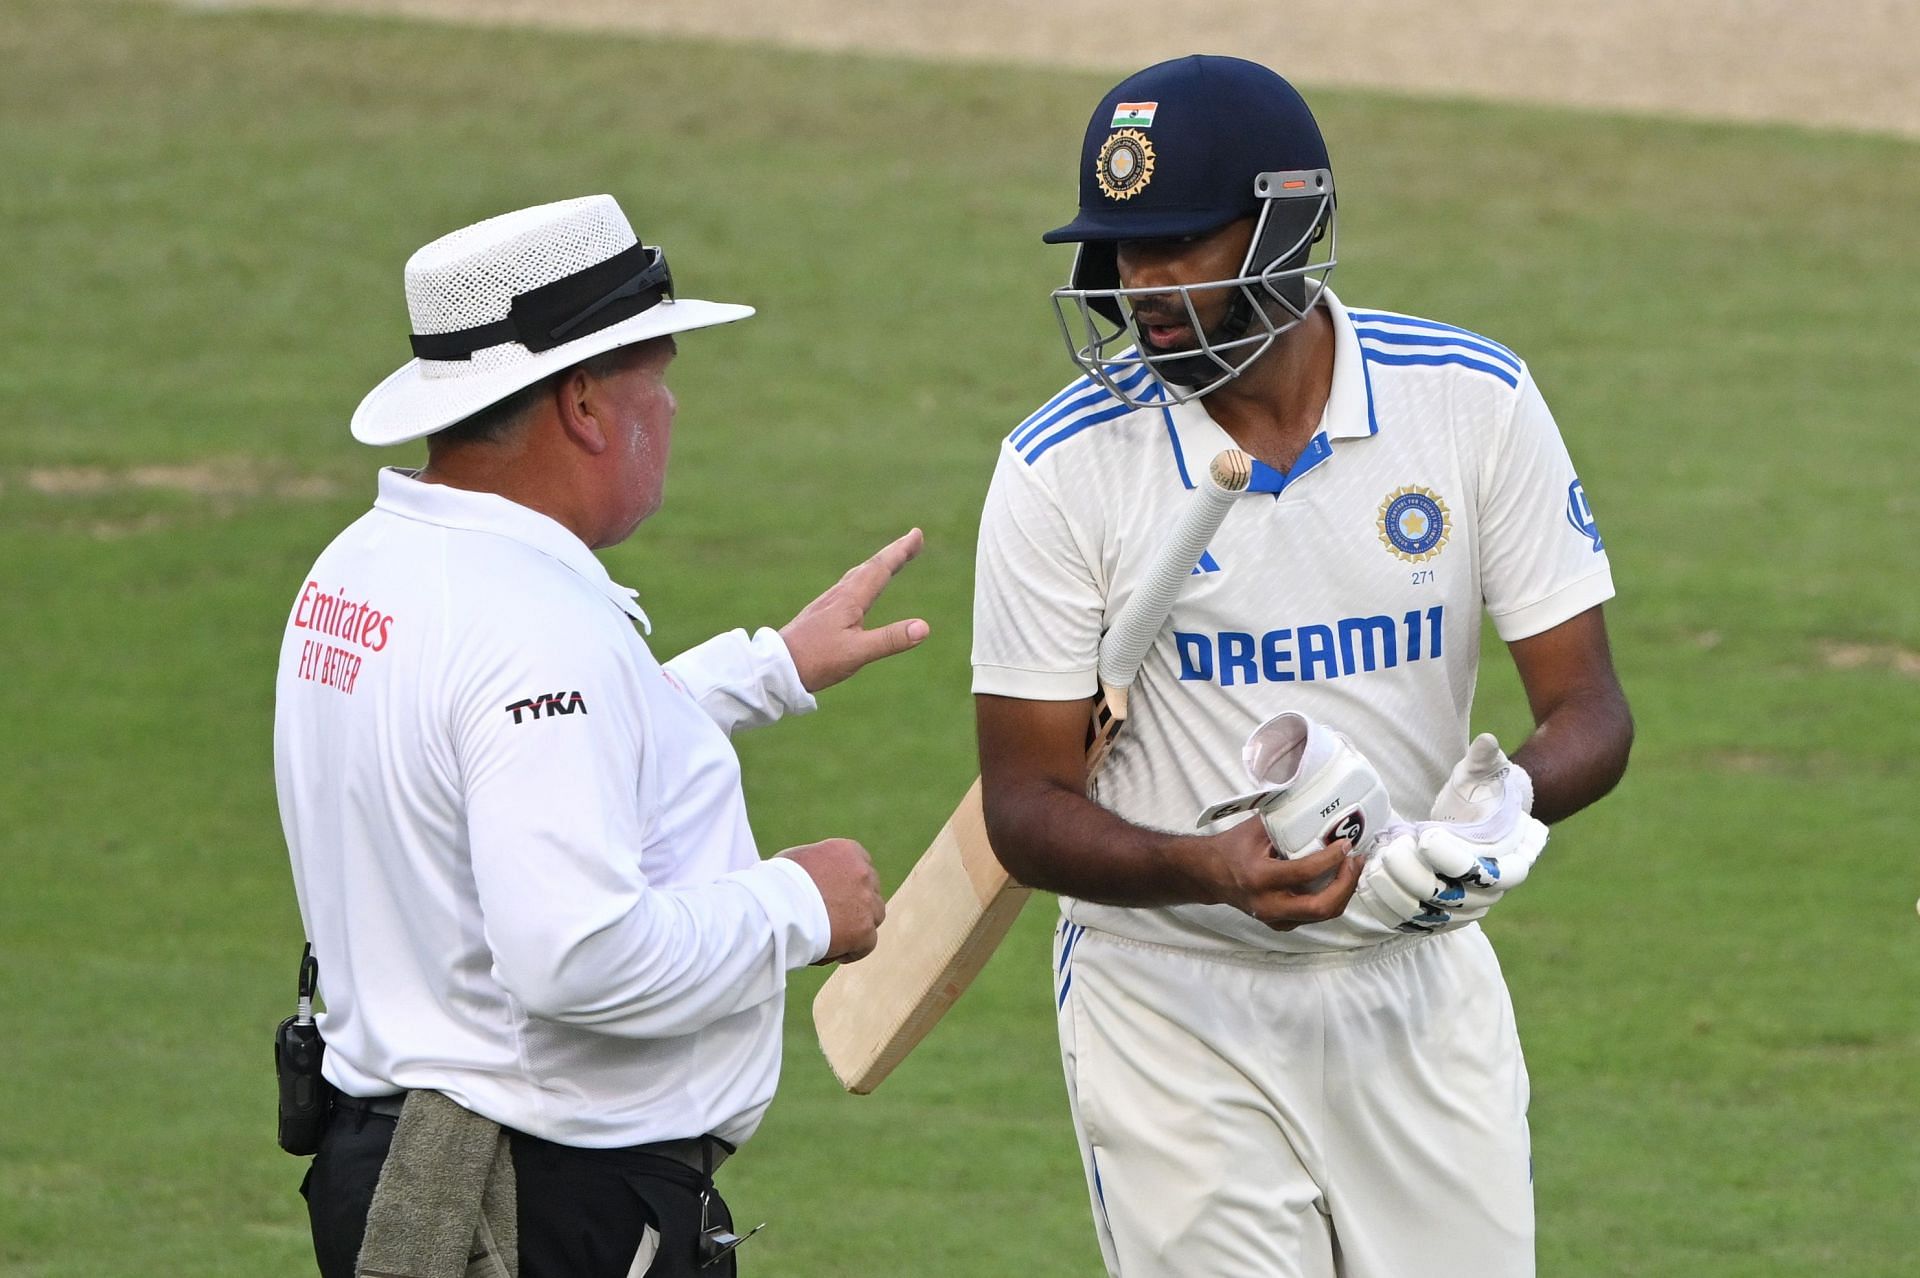 Ravichandran Ashwin with an animated discussion with umpire Marais Erasmus